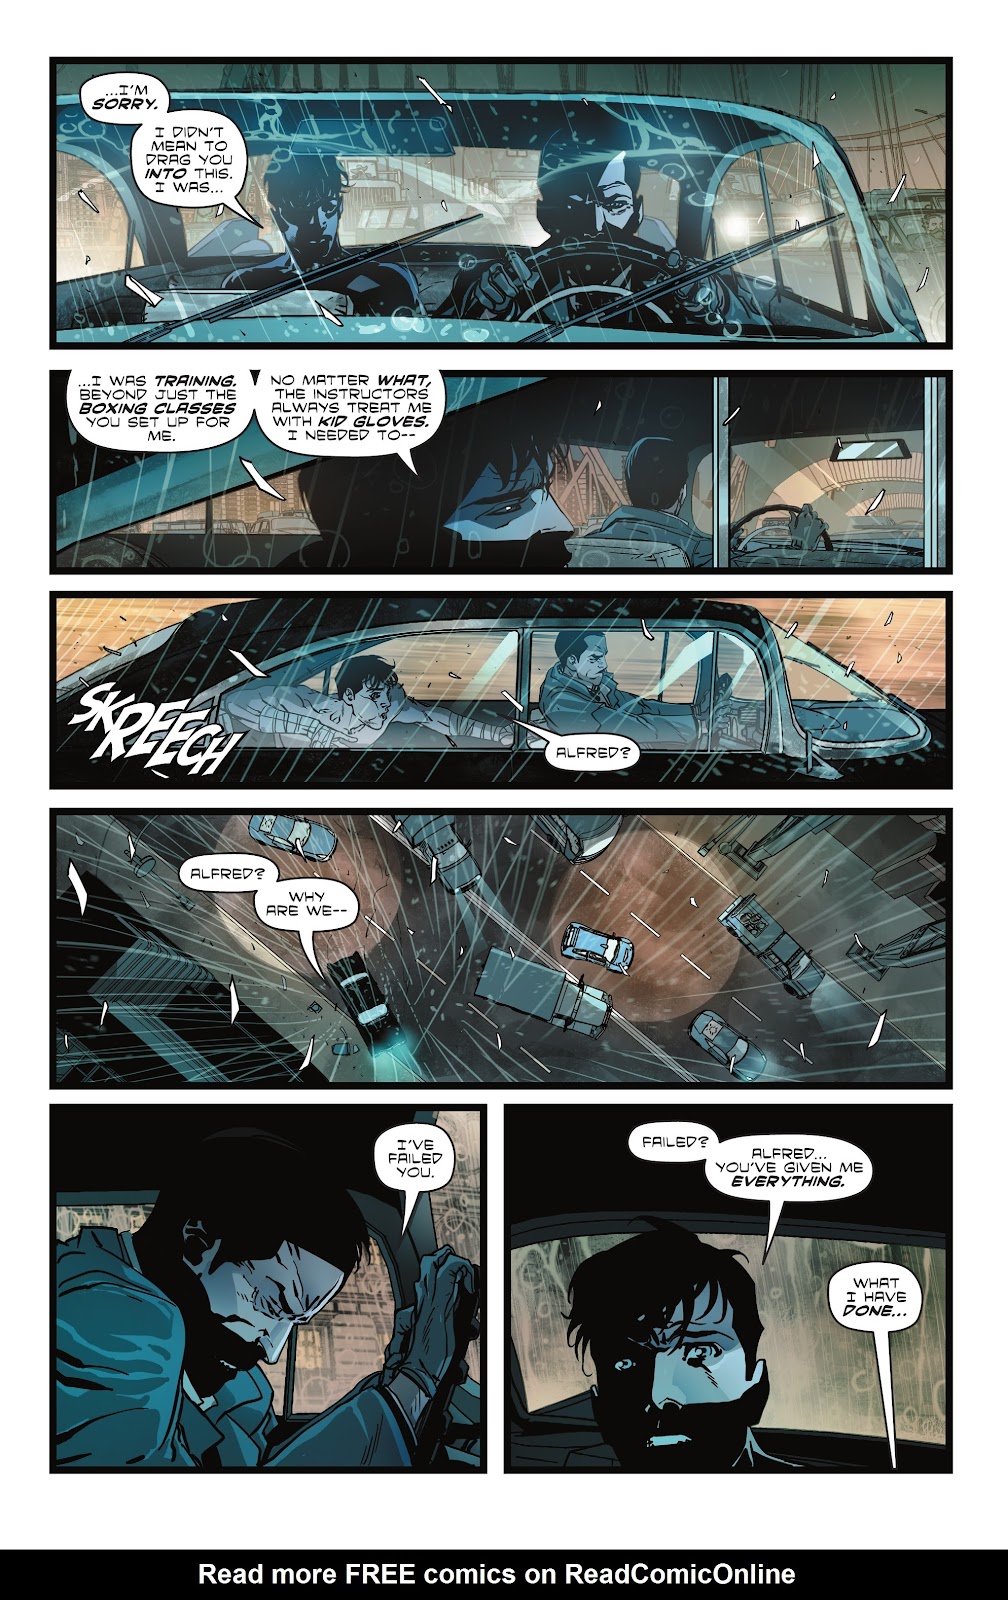 Batman: The Knight issue 1 - Page 27